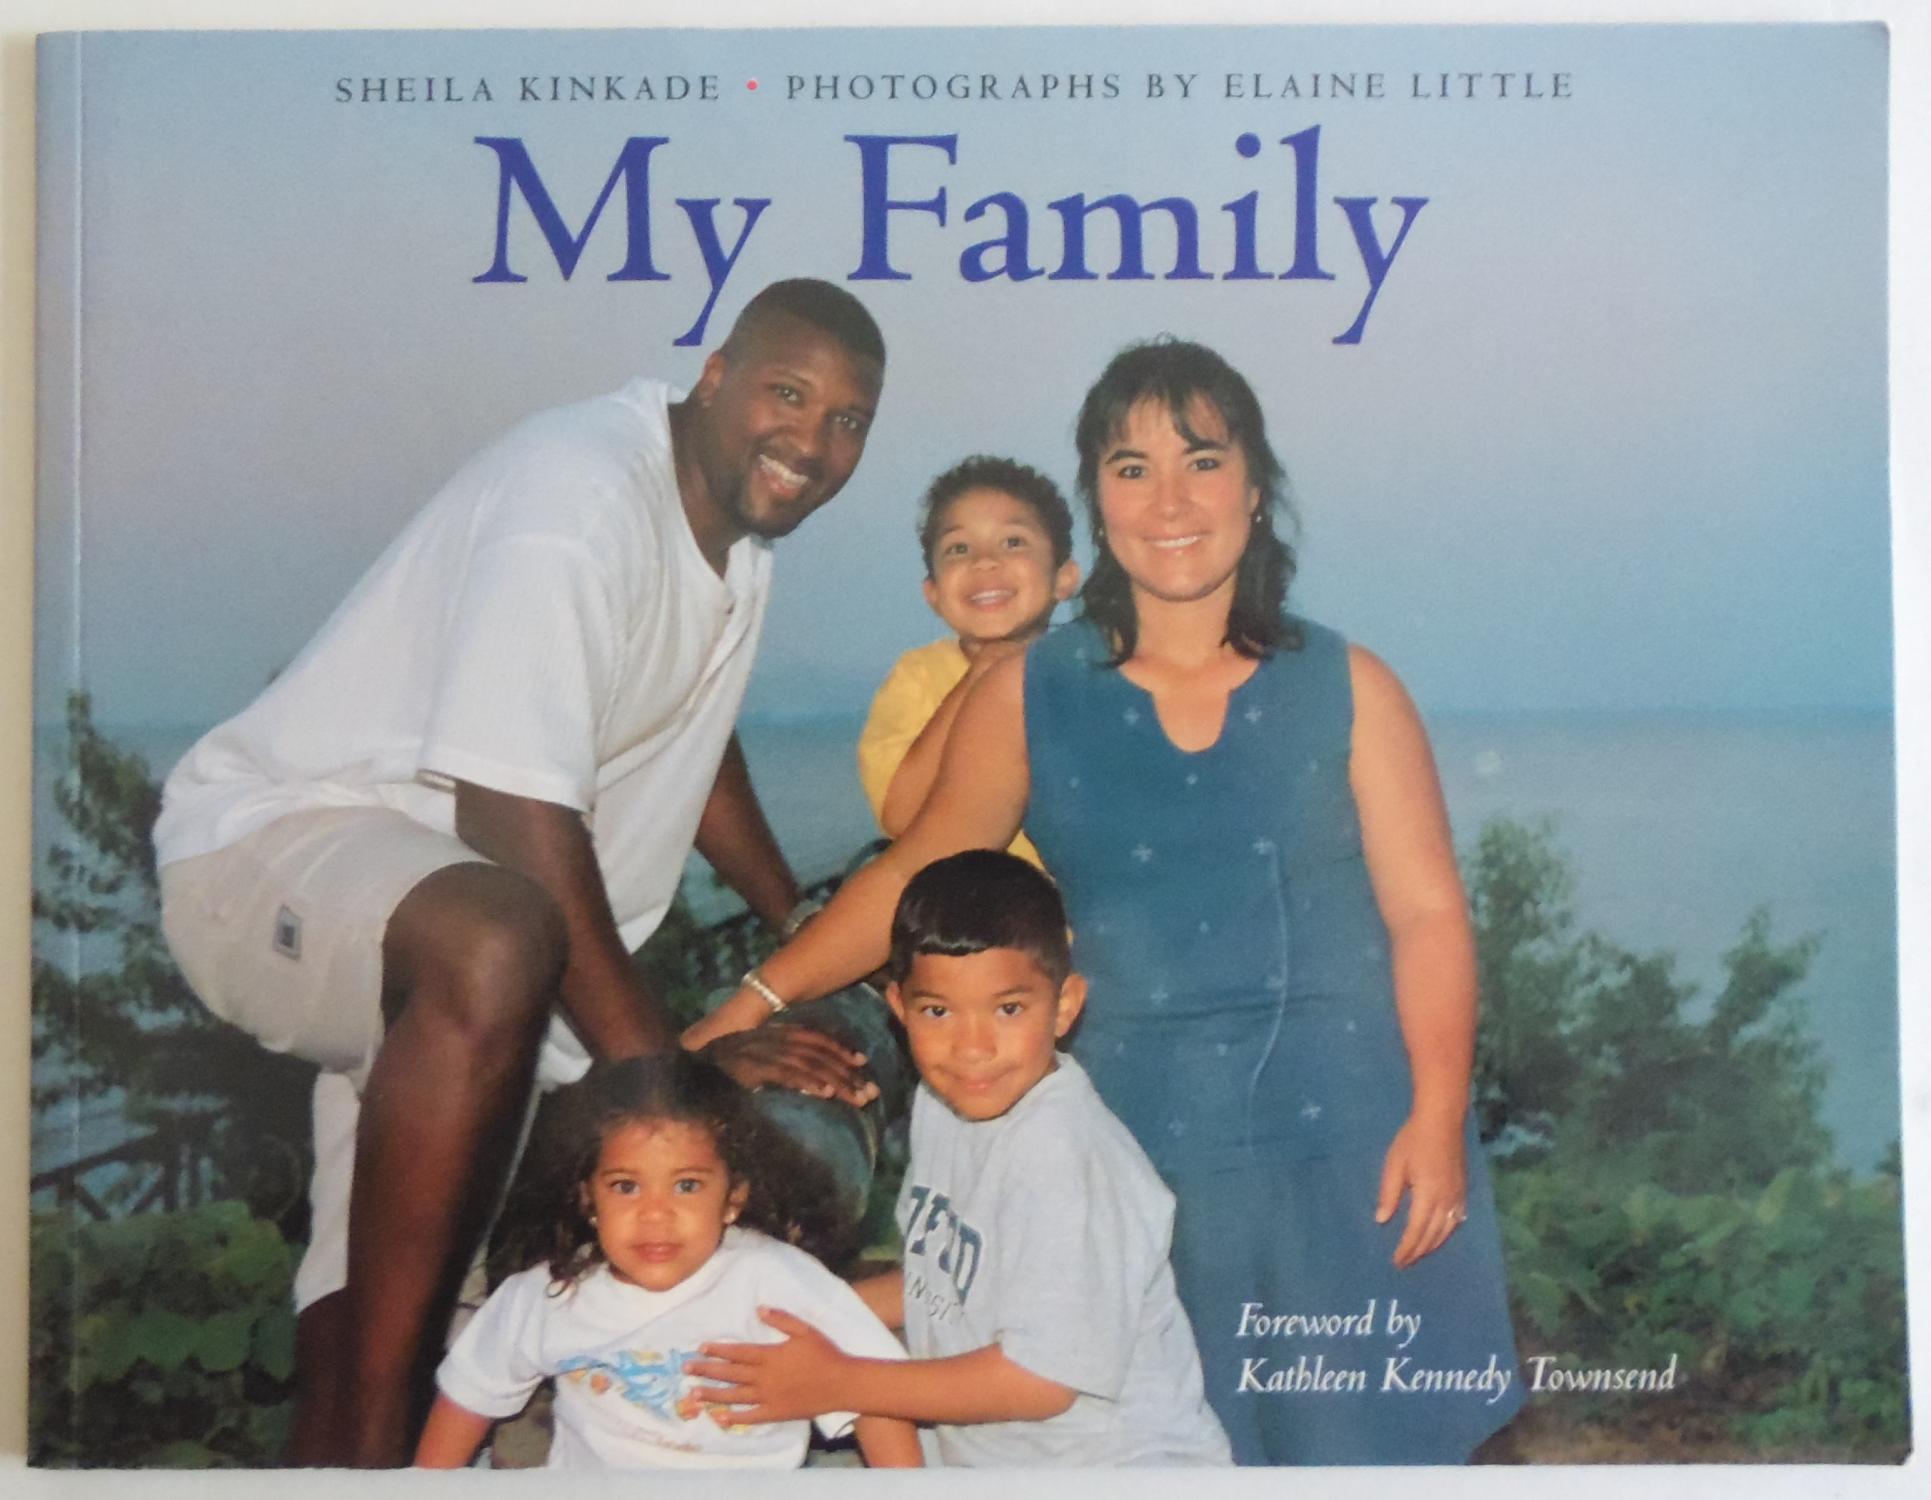 My Family by Kinkade, Sheila; Global Fund For Children (Organization); Little. - Kinkade, Sheila; Global Fund For Children (Organization); Little, Elaine [Illustrator]; Townsend, Kathleen Kennedy [Foreword];